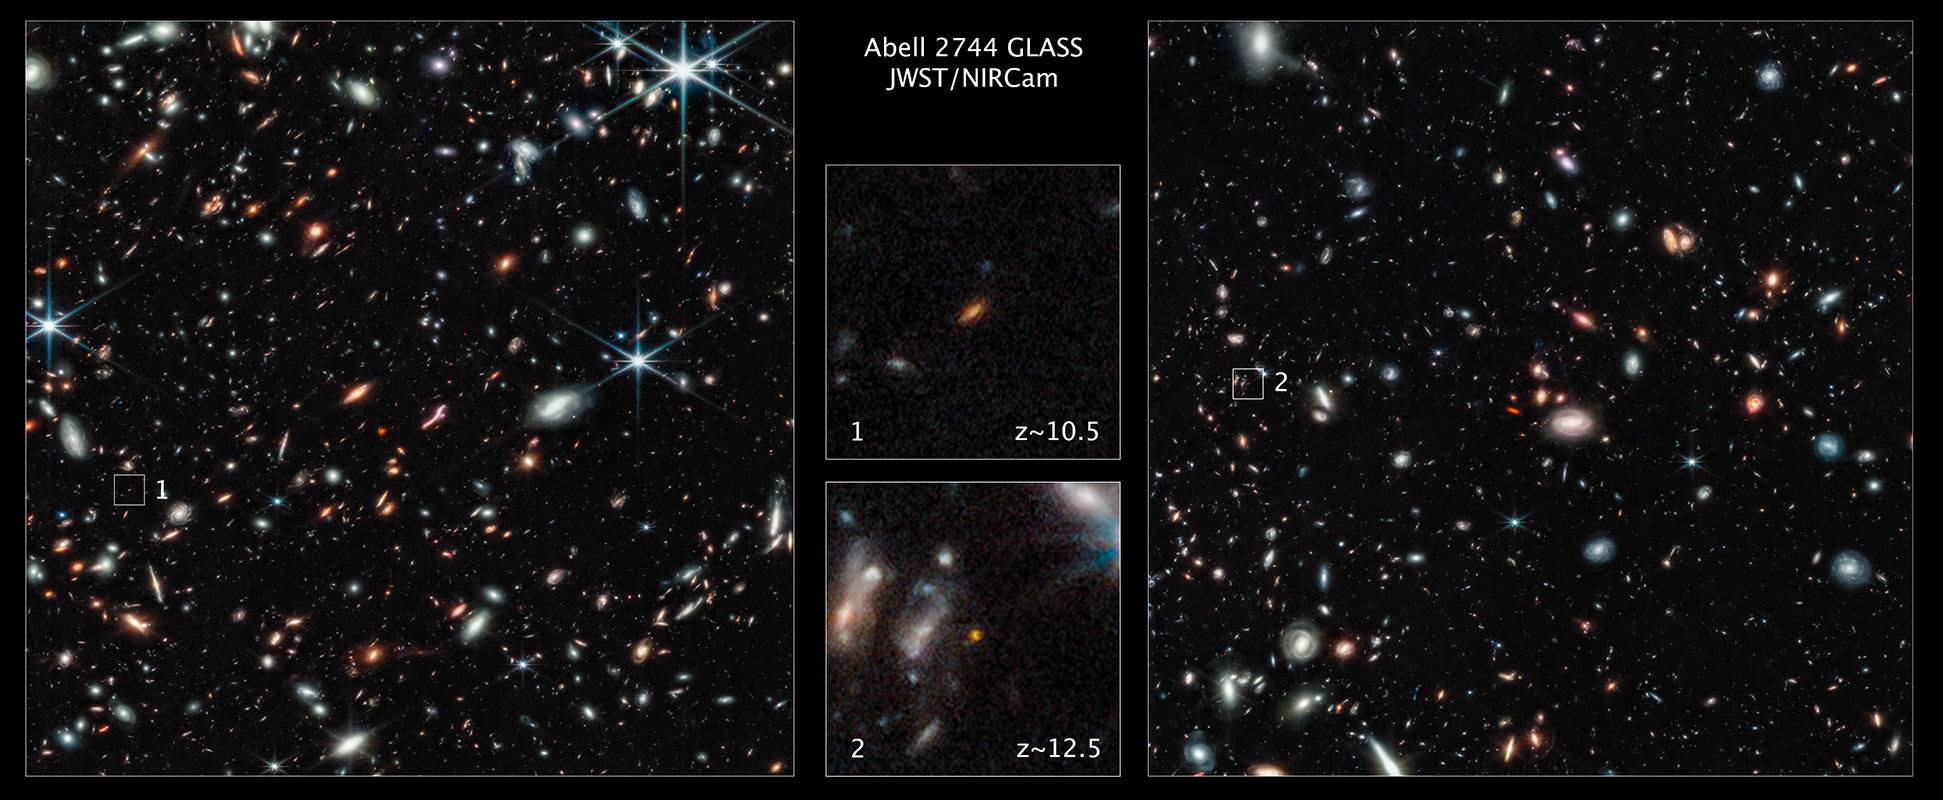 Two of the farthest galaxies seen to date are captured in these Webb Space Telescope pictures of the outer regions of the giant galaxy cluster Abell 2744. The galaxies are not inside the cluster, but many billions of light-years farther behind it. The galaxy labeled (1) existed only 450 million years after the big bang. The galaxy labeled (2) existed 350 million years after the big bang. Both are seen really close in time to the big bang which occurred 13.8 billion years ago. These galaxies are tiny compared to our Milky Way, being just a few percent of its size, even the unexpectedly elongated galaxy labeled (1).